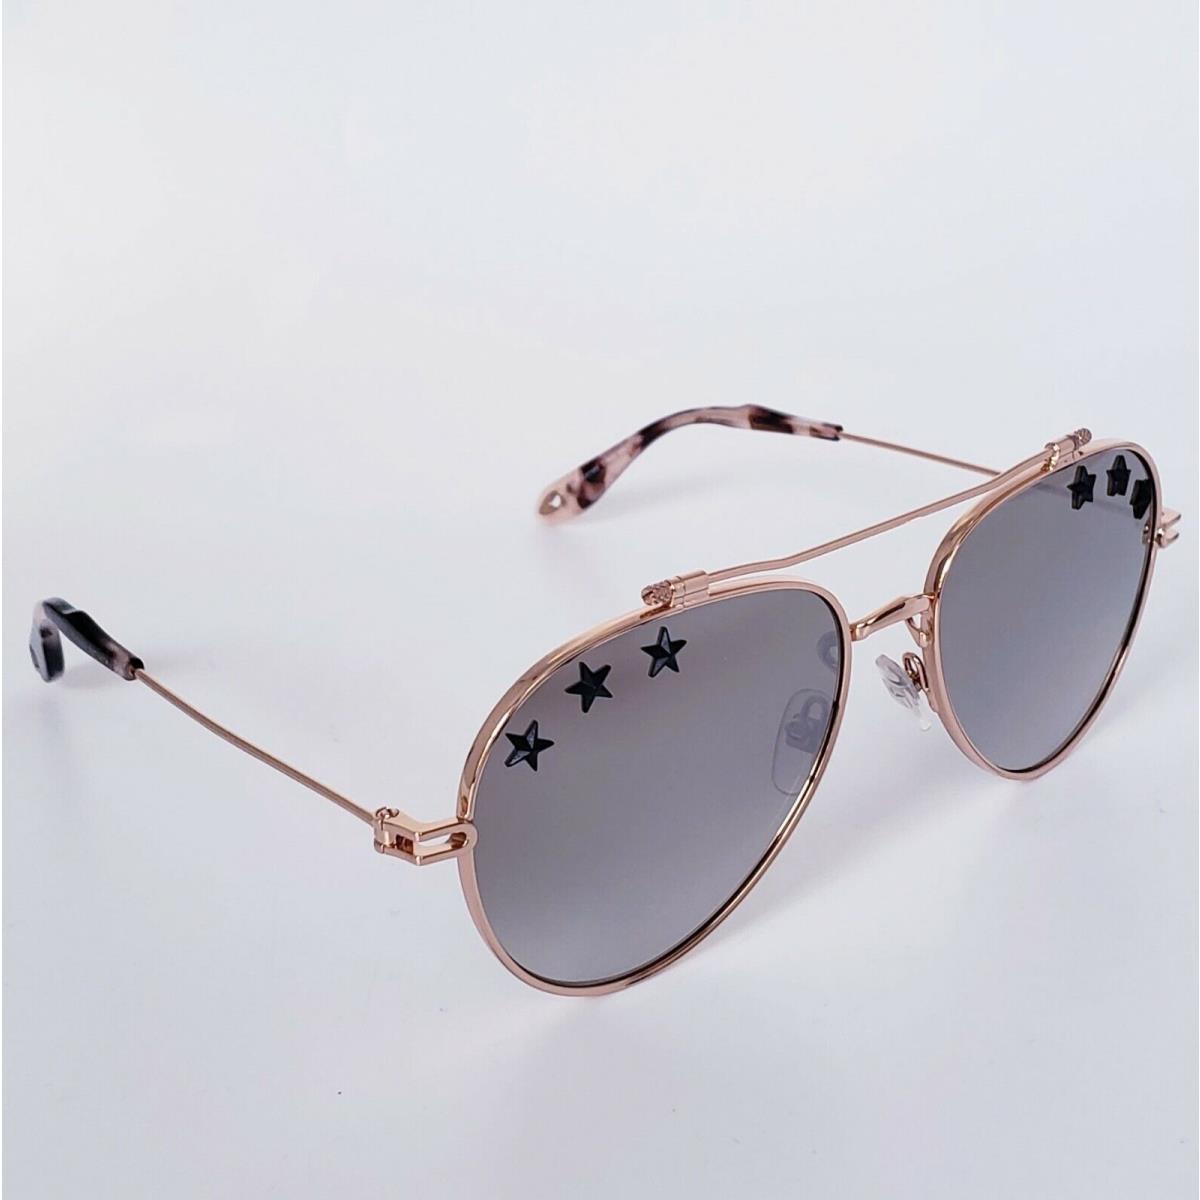 Givenchy sunglasses Star - Frame: Gold, Lens: Brown grey Gradient with Silver mirror effect 1